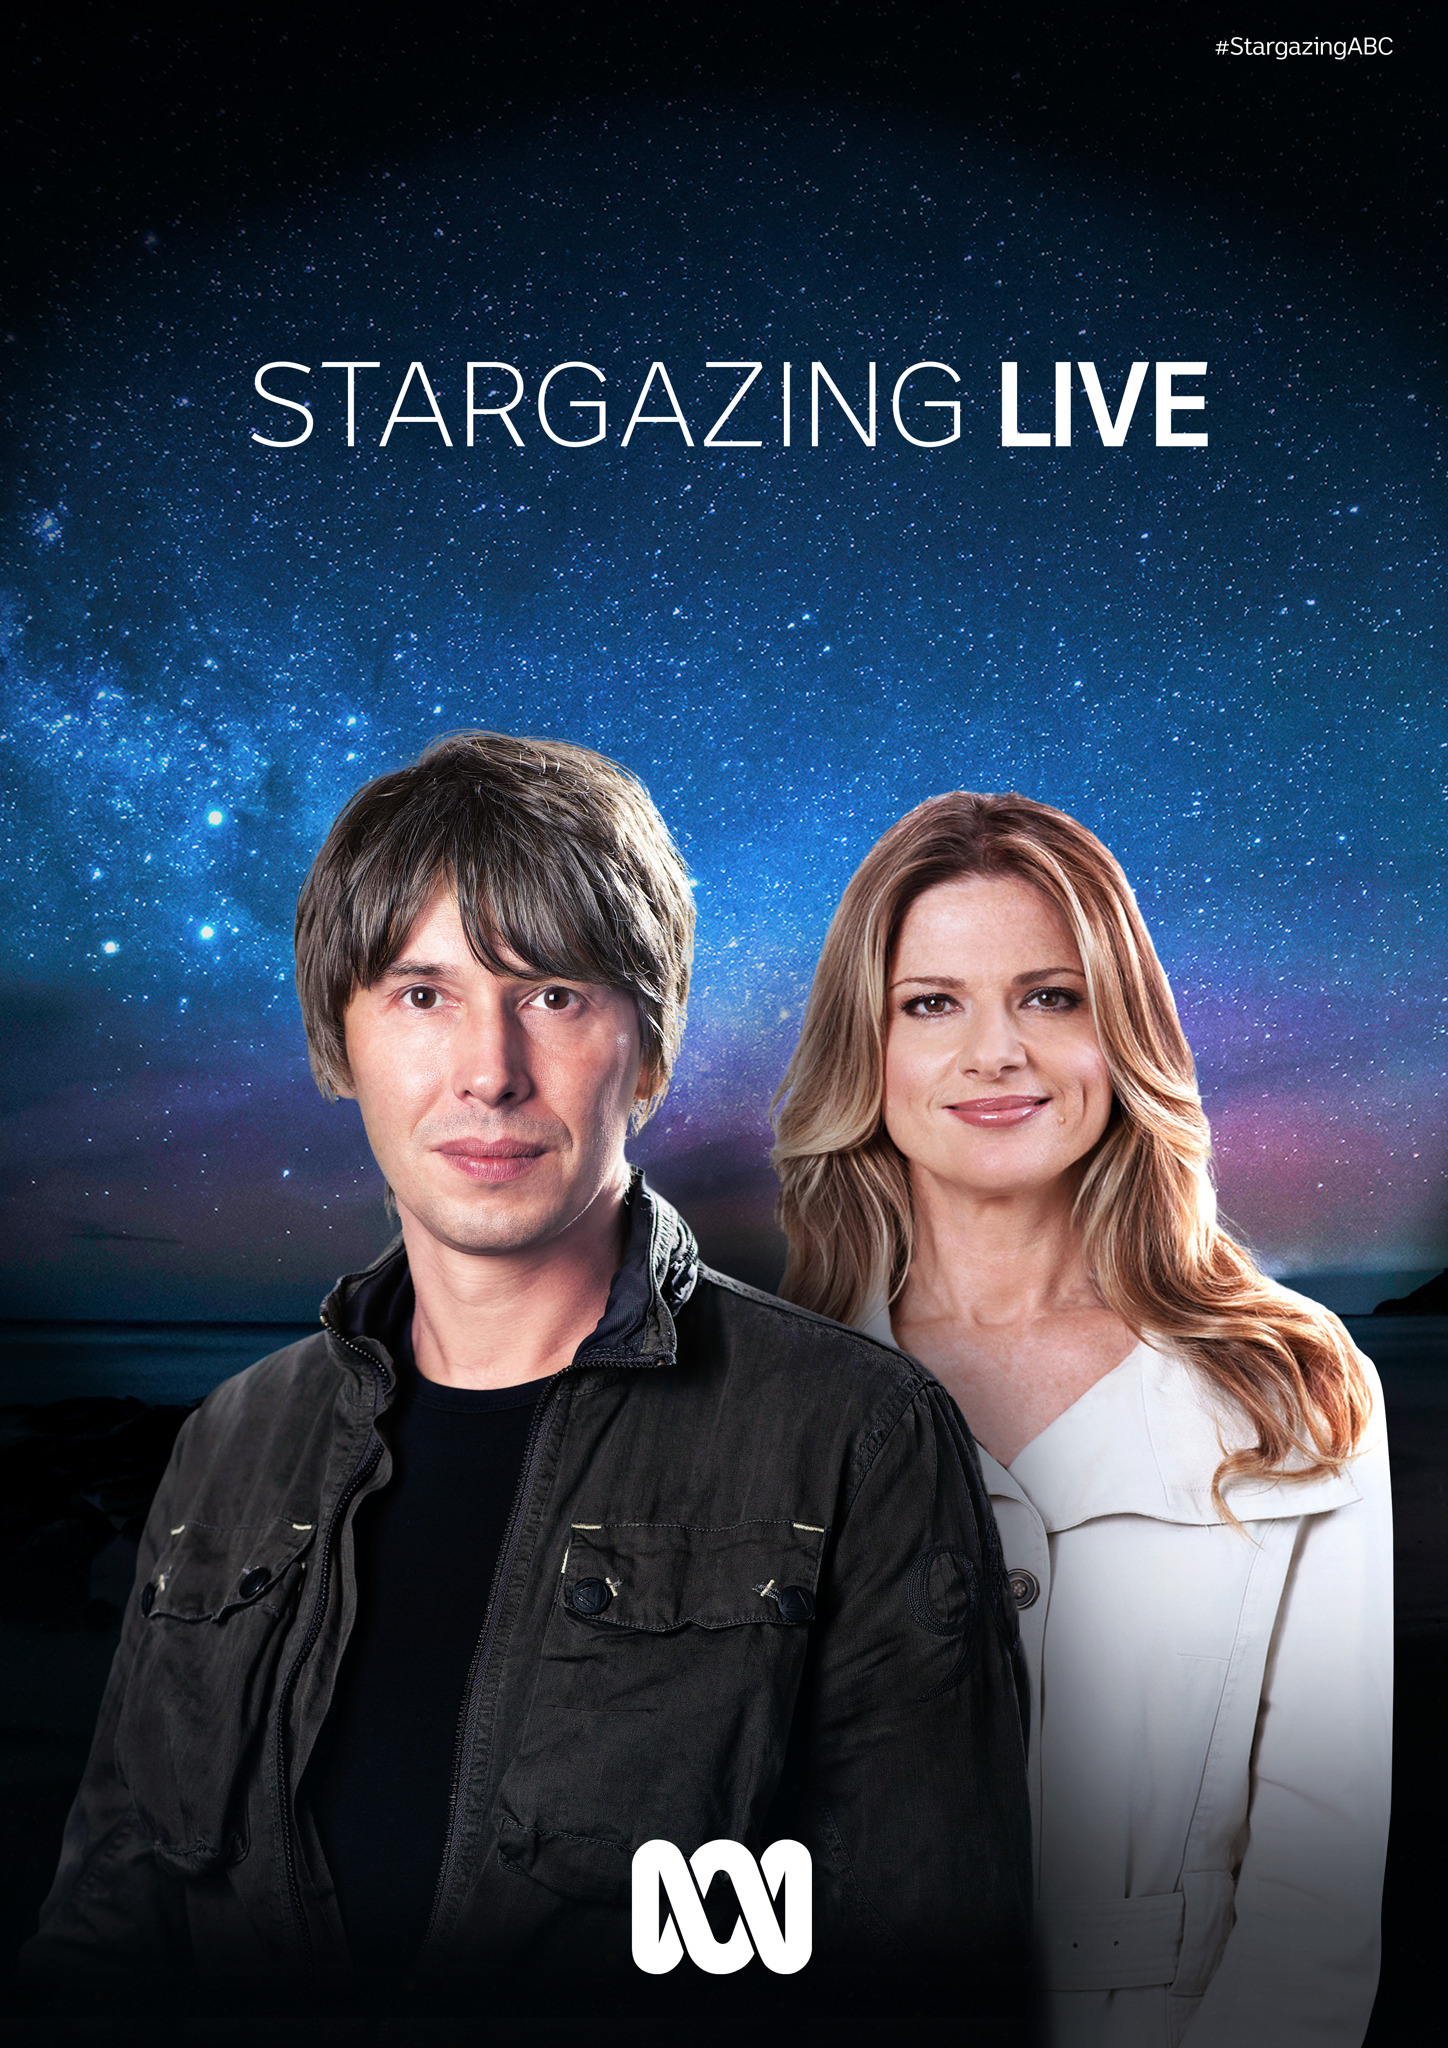 ABC’s Stargazing Live set to eclipse a Guinness World Records title